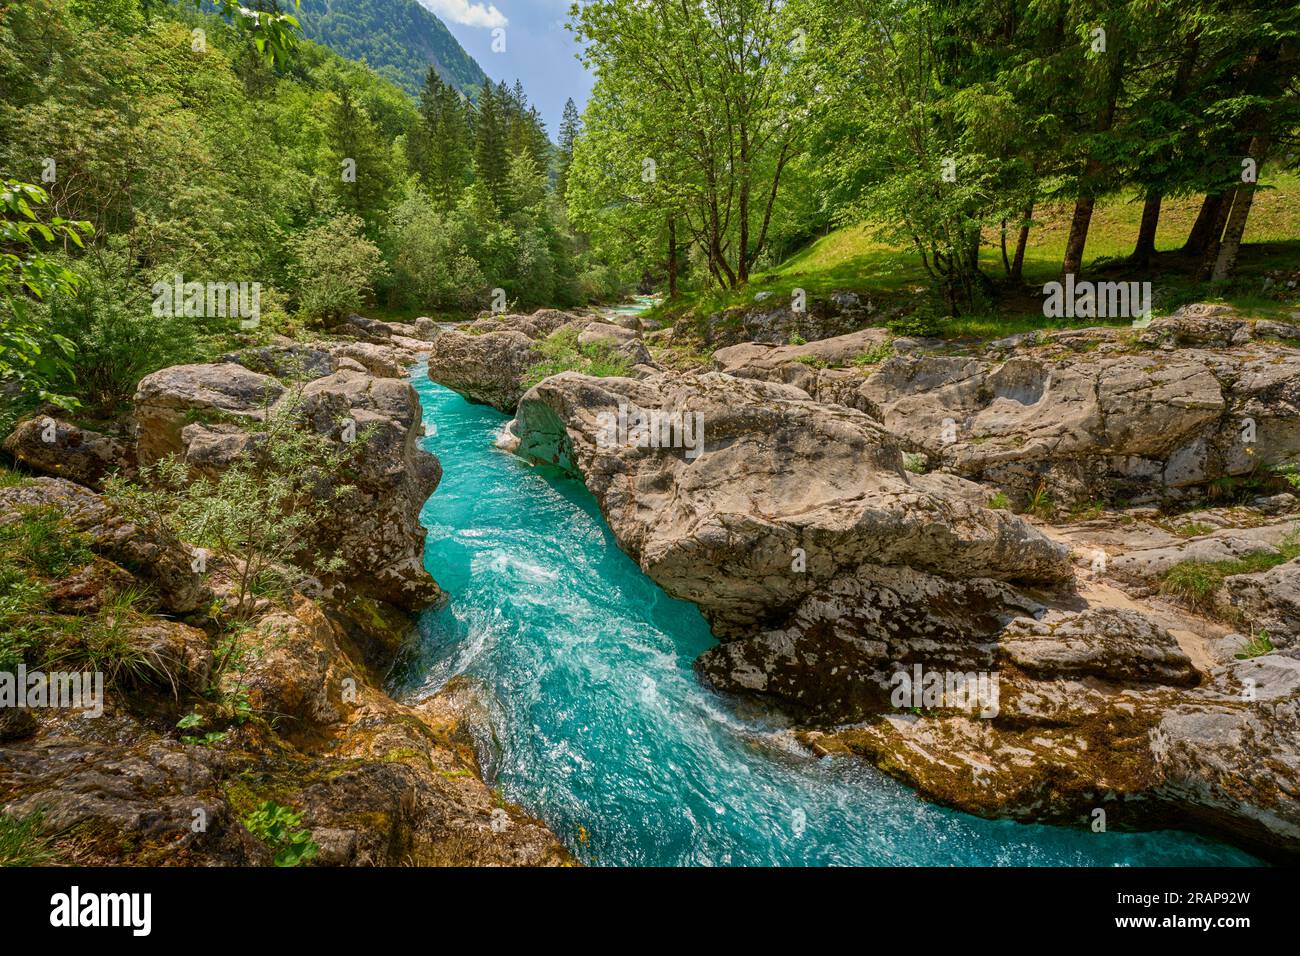 wild canyon with cristal clear turquoise water in the Soca valley, Trigalv National Park near Bovec, Slovenia Stock Photo